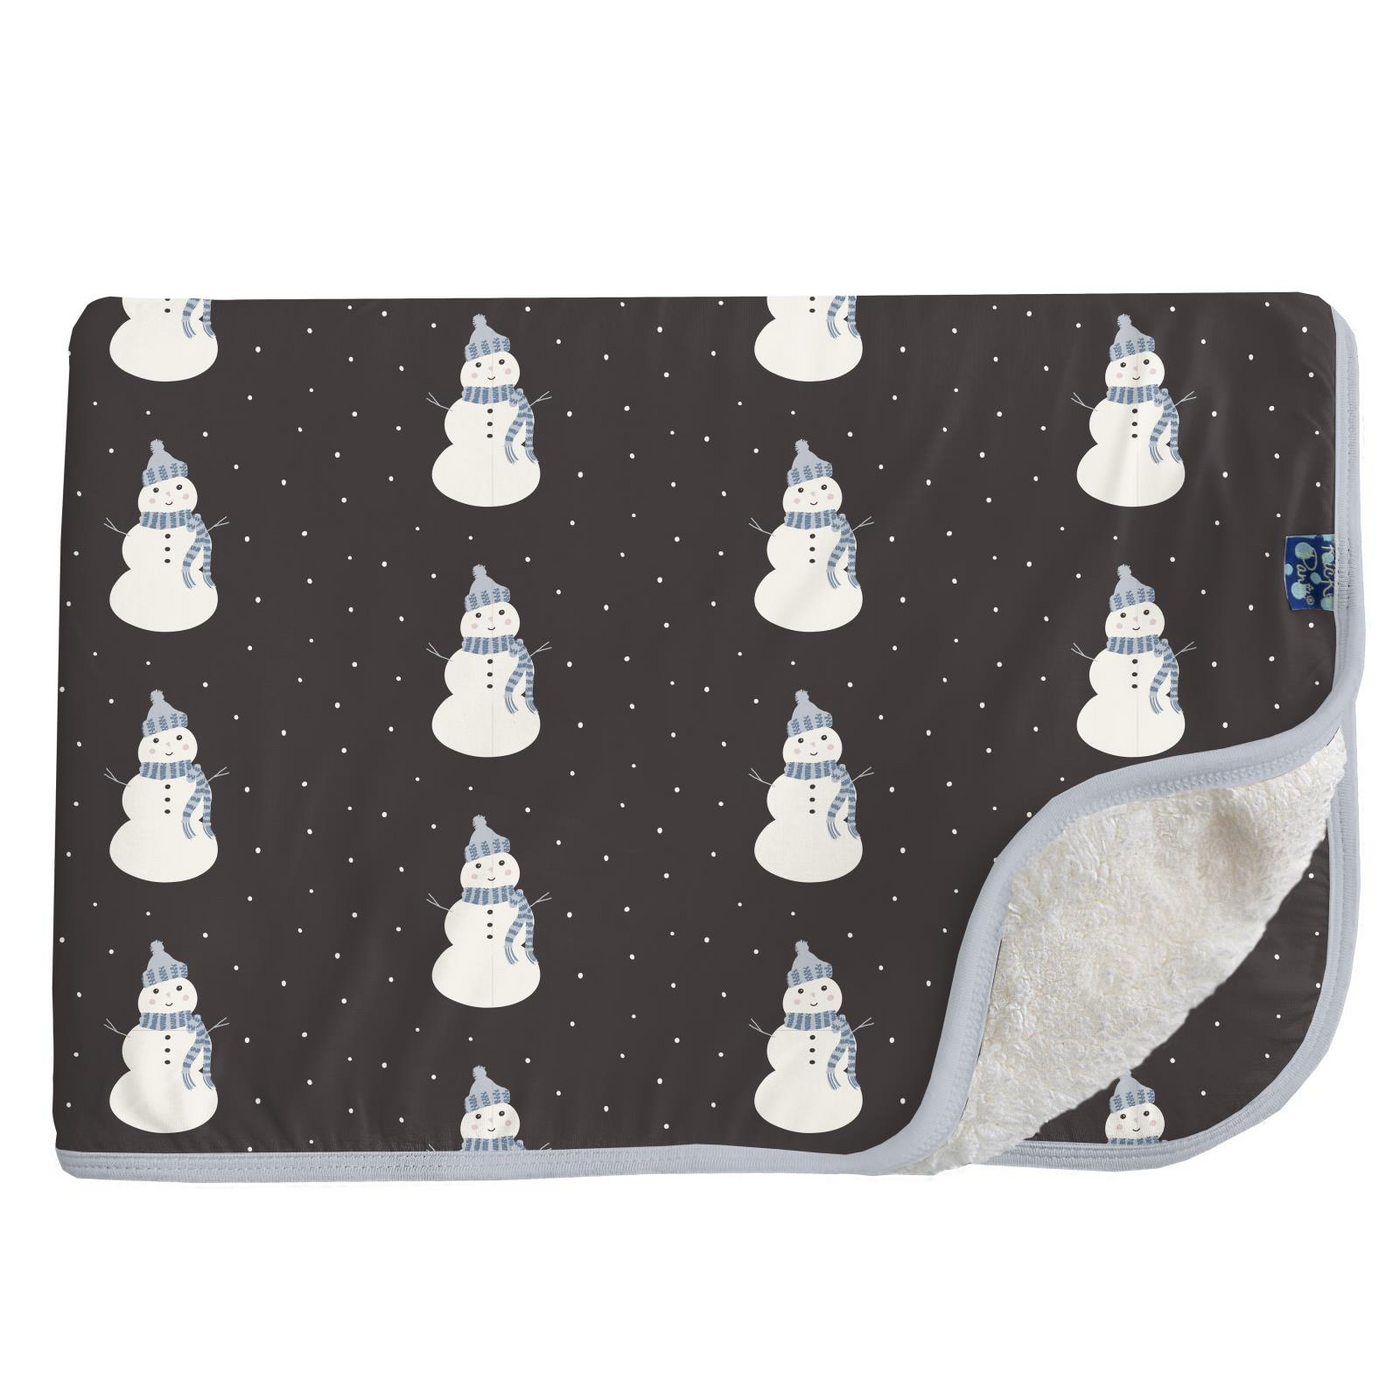 Kickee Pants Sherpa Lined Toddler Blanket: Midnight Tiny Snowman